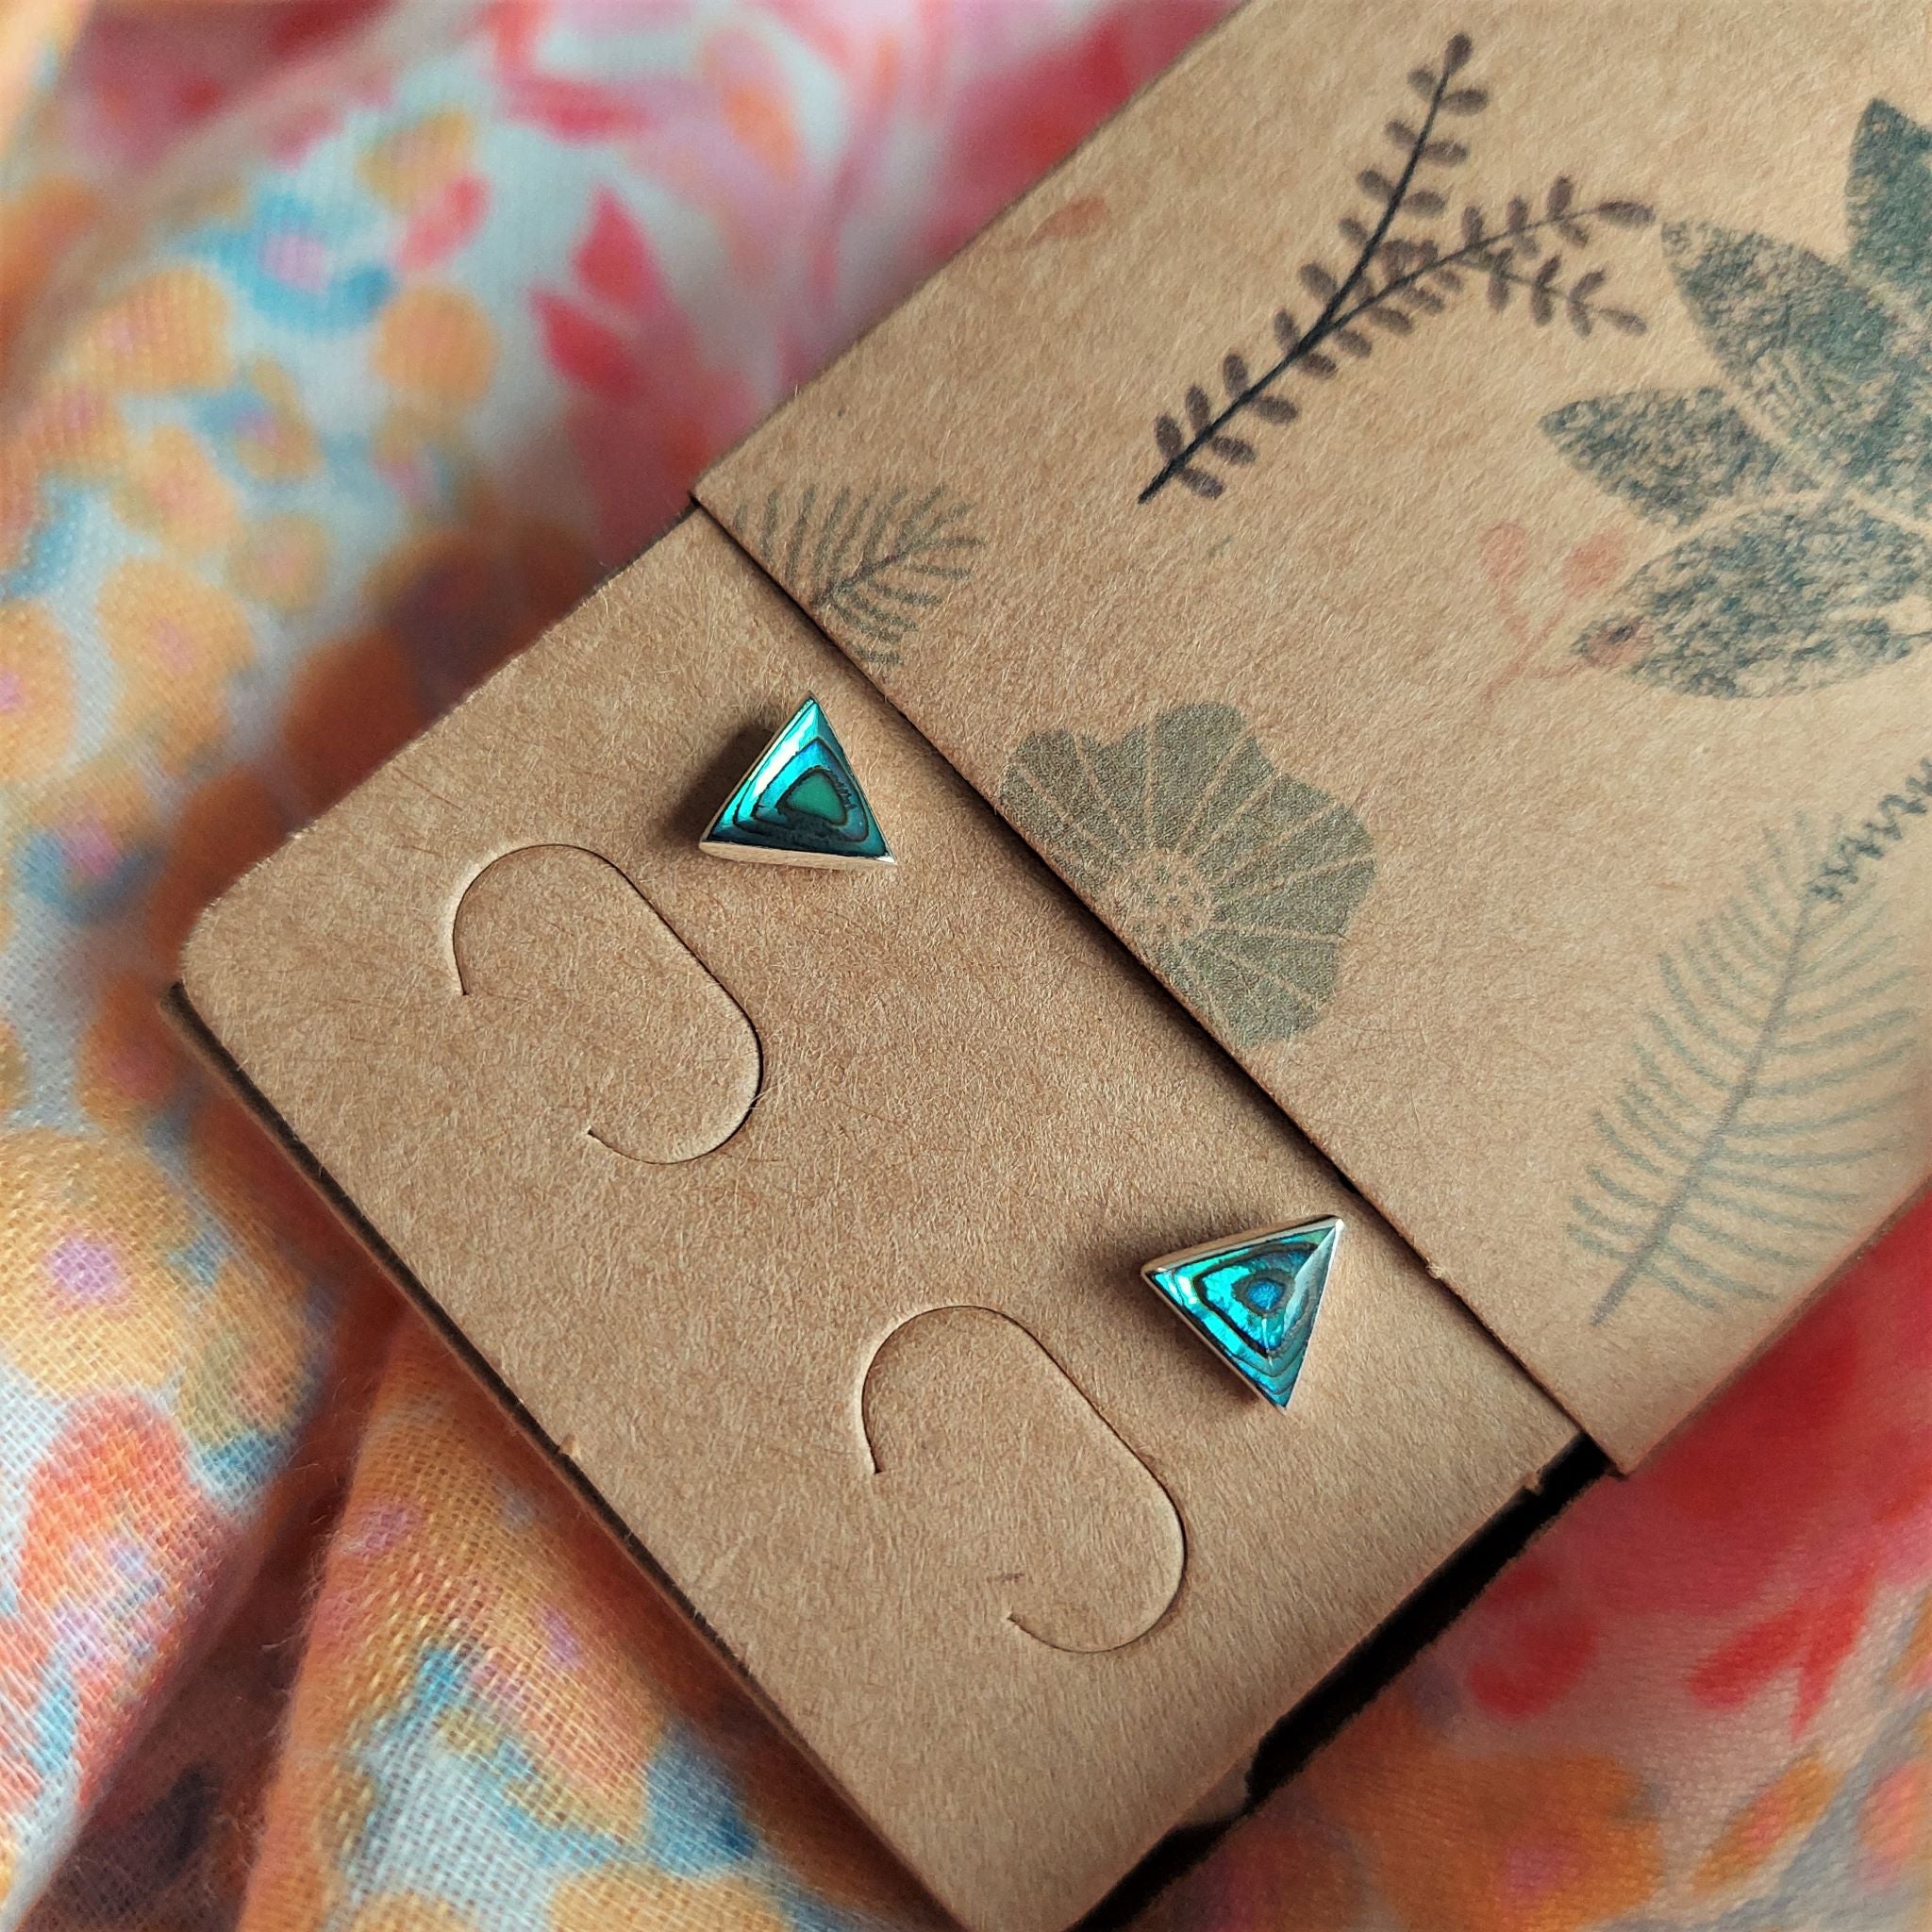 925 Hall Marked Sterling Silver  Super Cute blue/green Abalone Triangle shaped Stud Earring  H - 7mm x W - 7mm   Perfect for everyday wear!  **Presented in lovely Kraft paper gift box with reusable organza pouch**